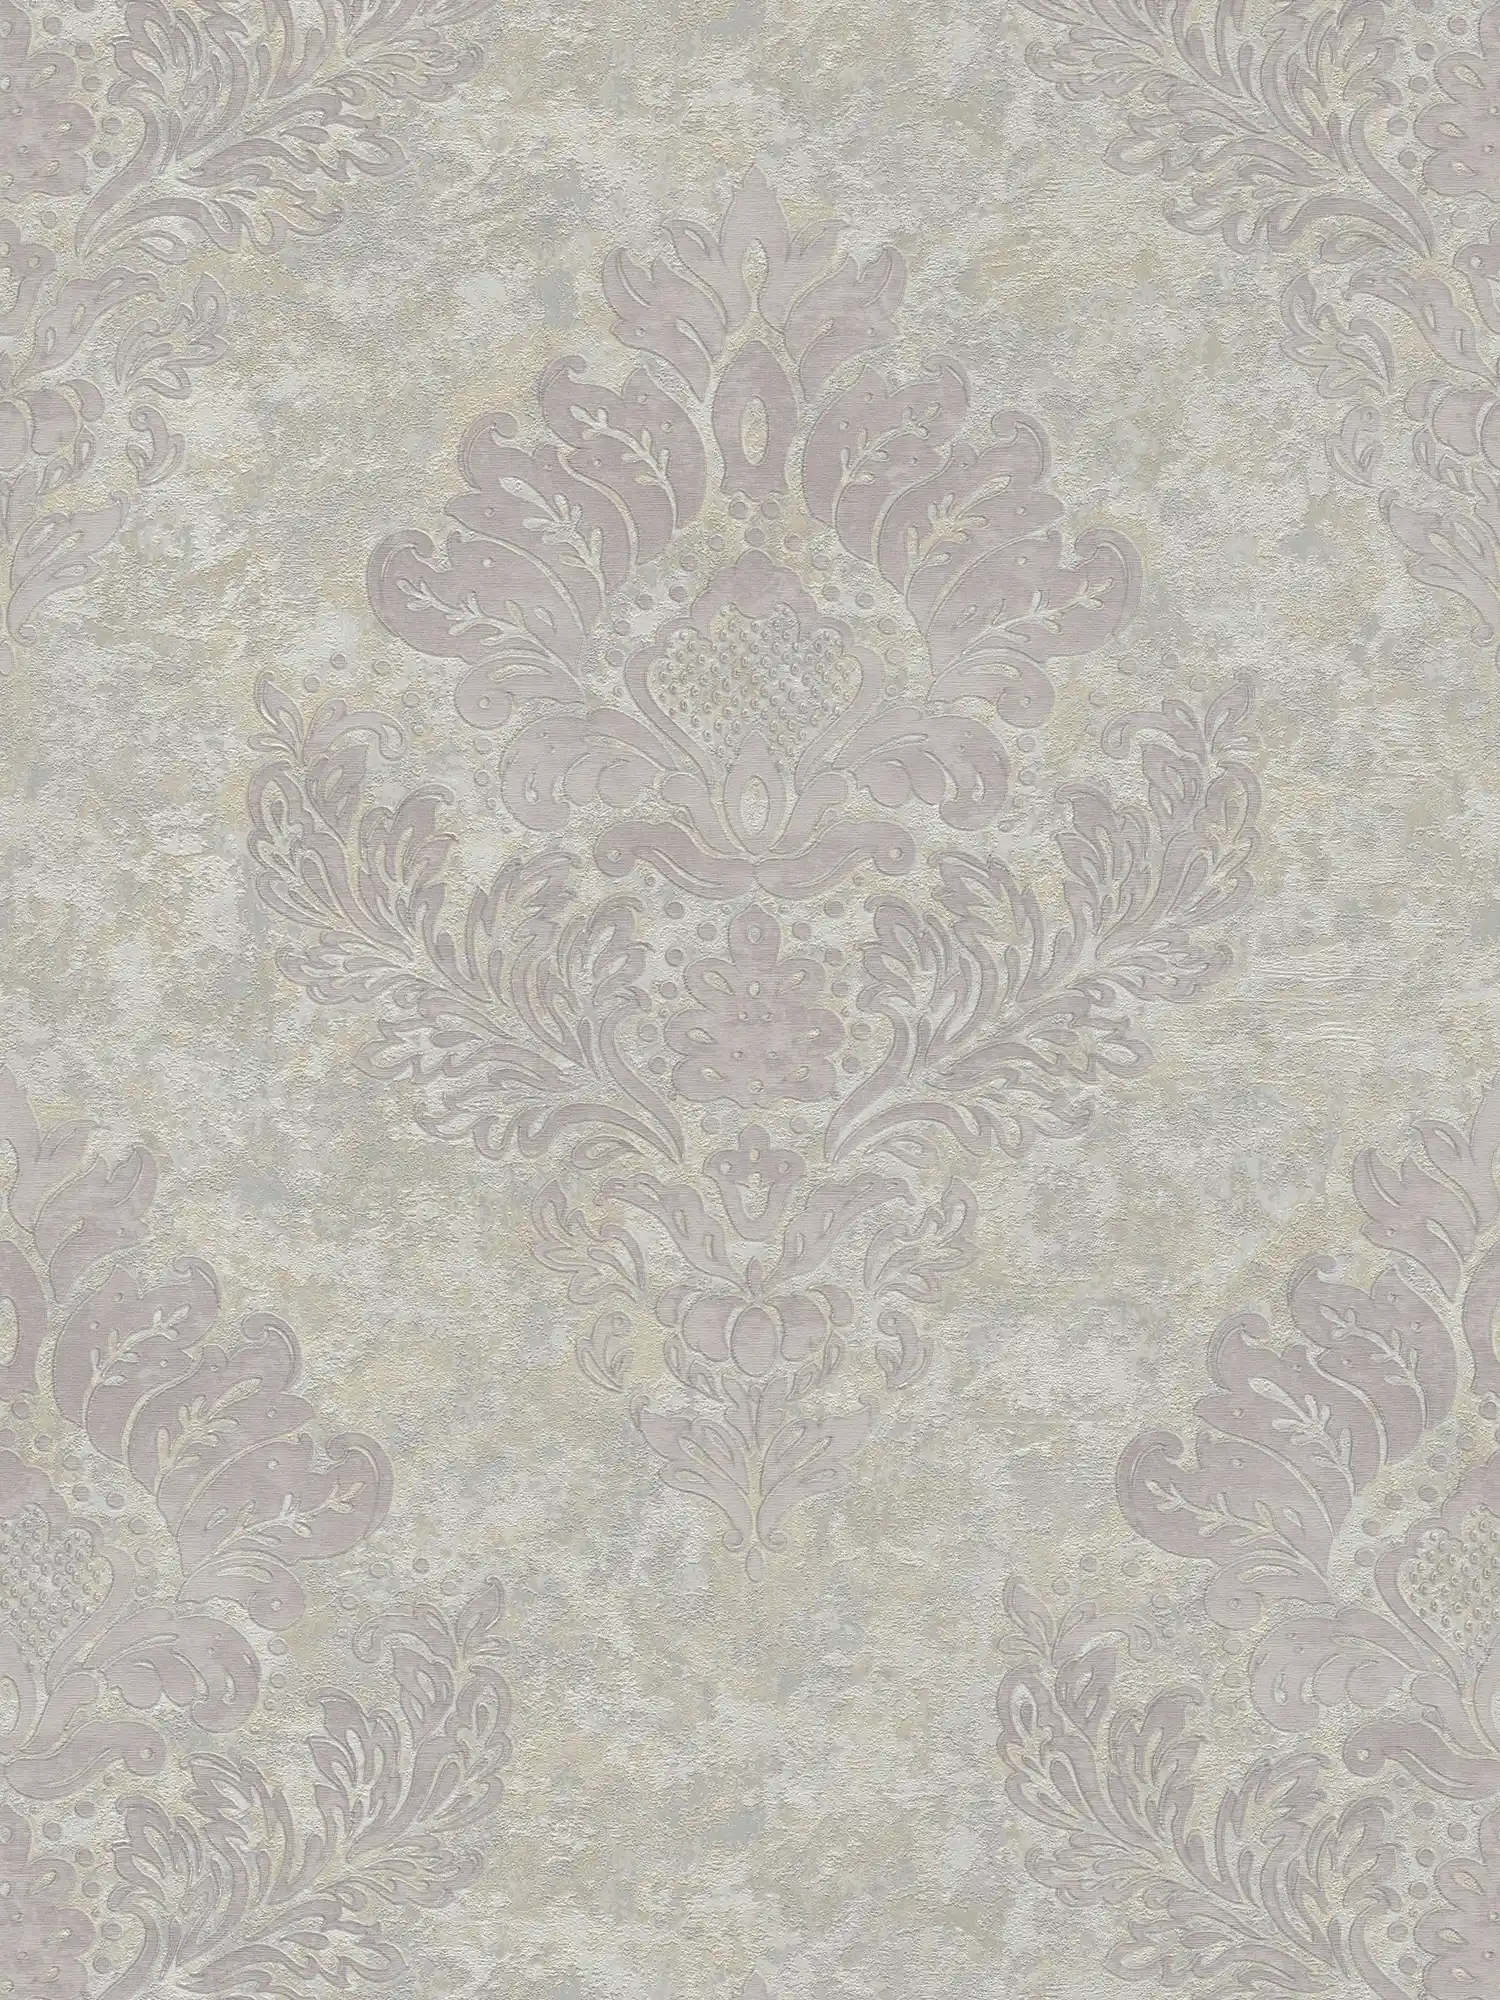 Wallpaper with floral ornaments & metallic effect - beige, grey
